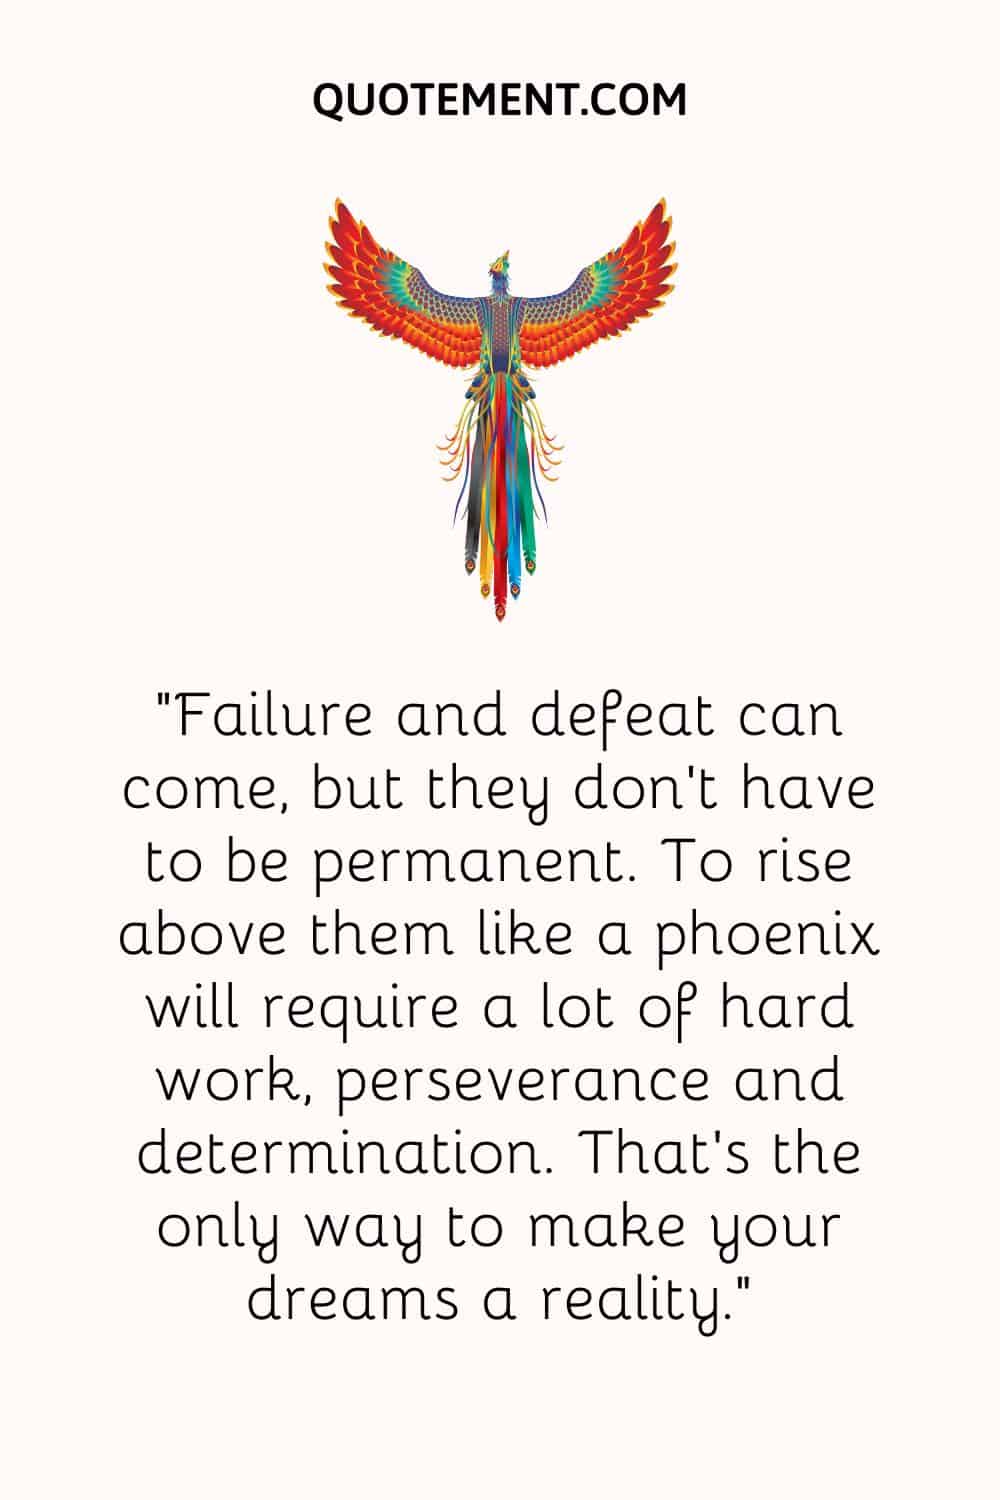 Failure and defeat can come, but they don’t have to be permanent